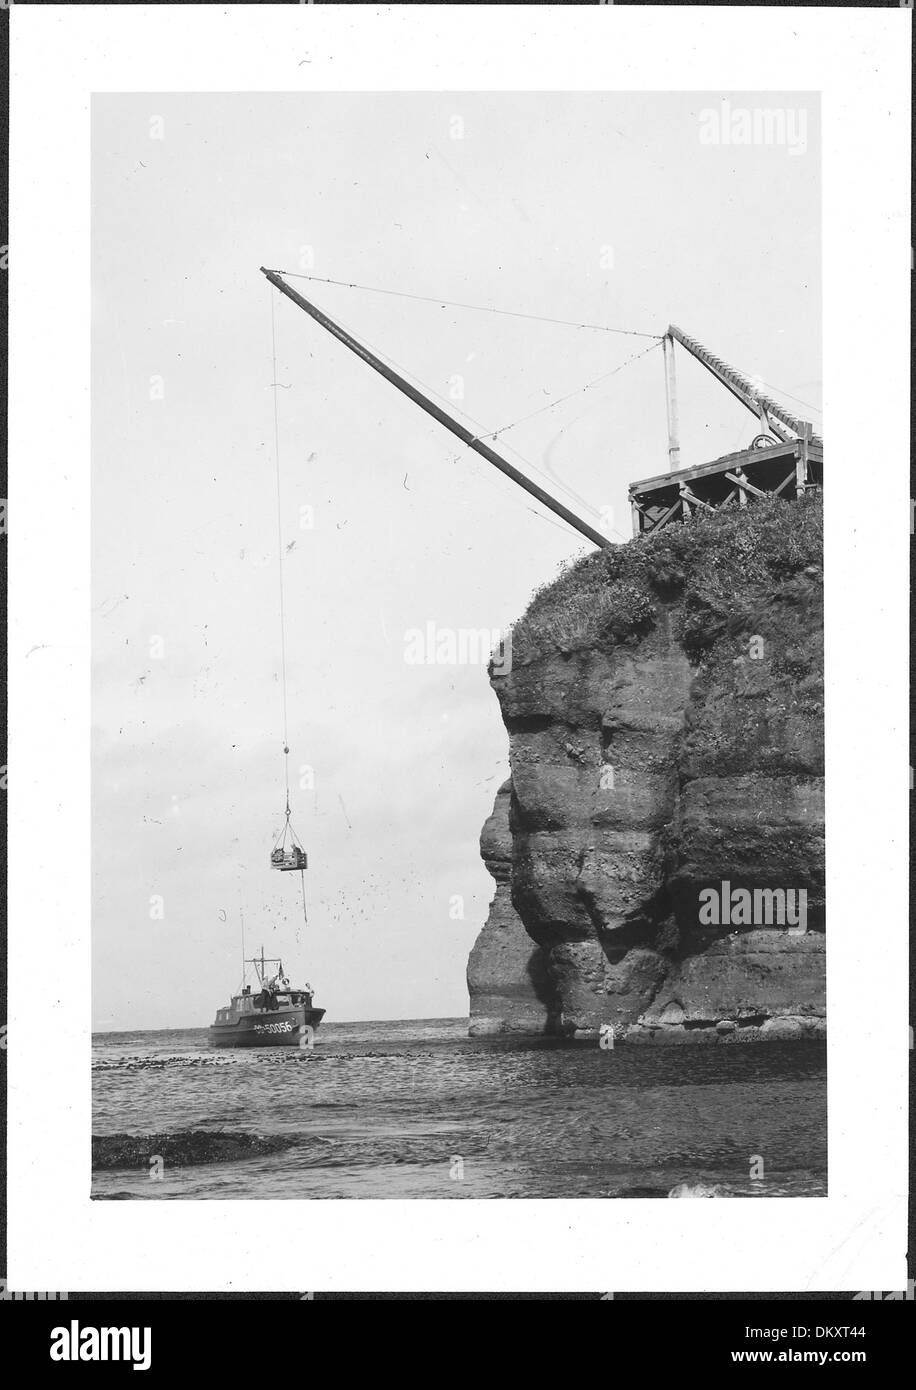 'The lift - only method of going aboard.' Cape Flattery Lightstation, 1943., ca. 1943 - ca. 1953 298190 Stock Photo